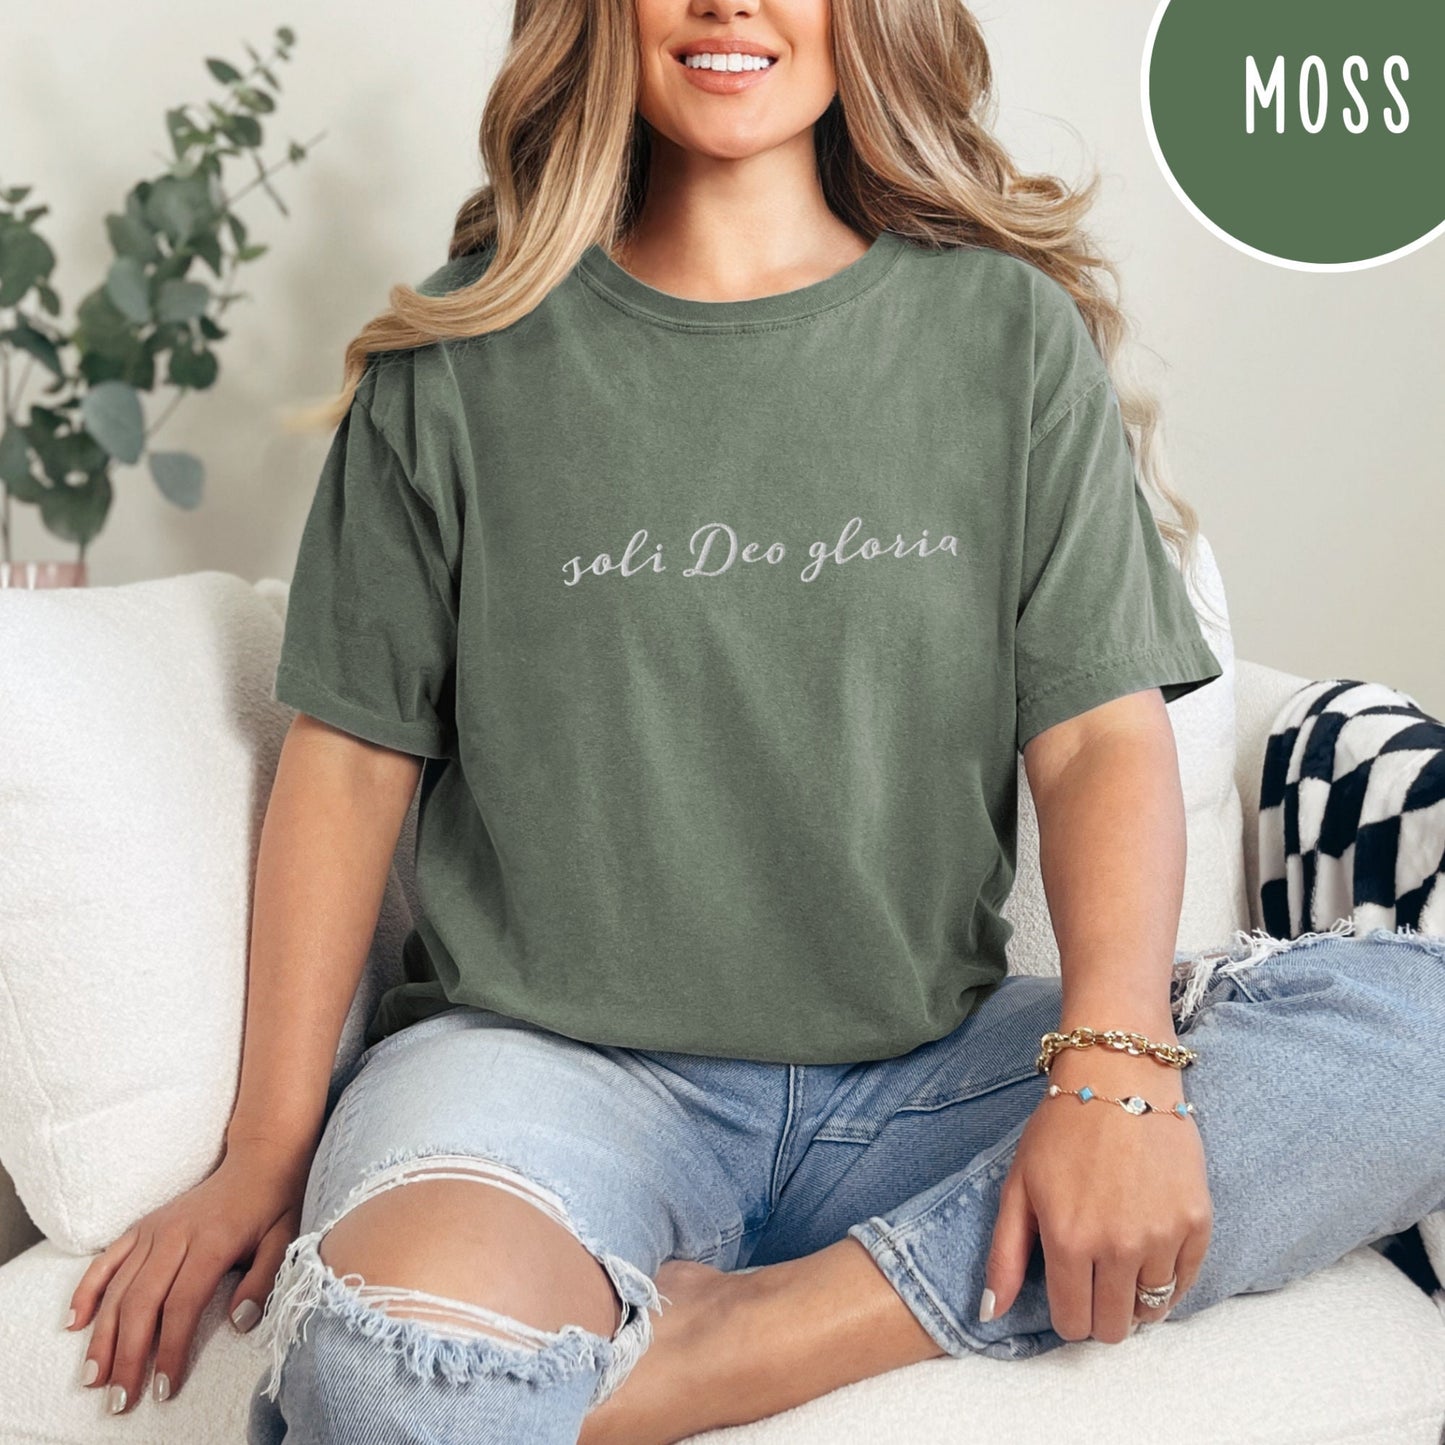 Christian Embroidered Shirt | Christian | Gift for Her | Minimalist Classy Church Shirt | Soli Deo Gloria means to God Alone be the Glory